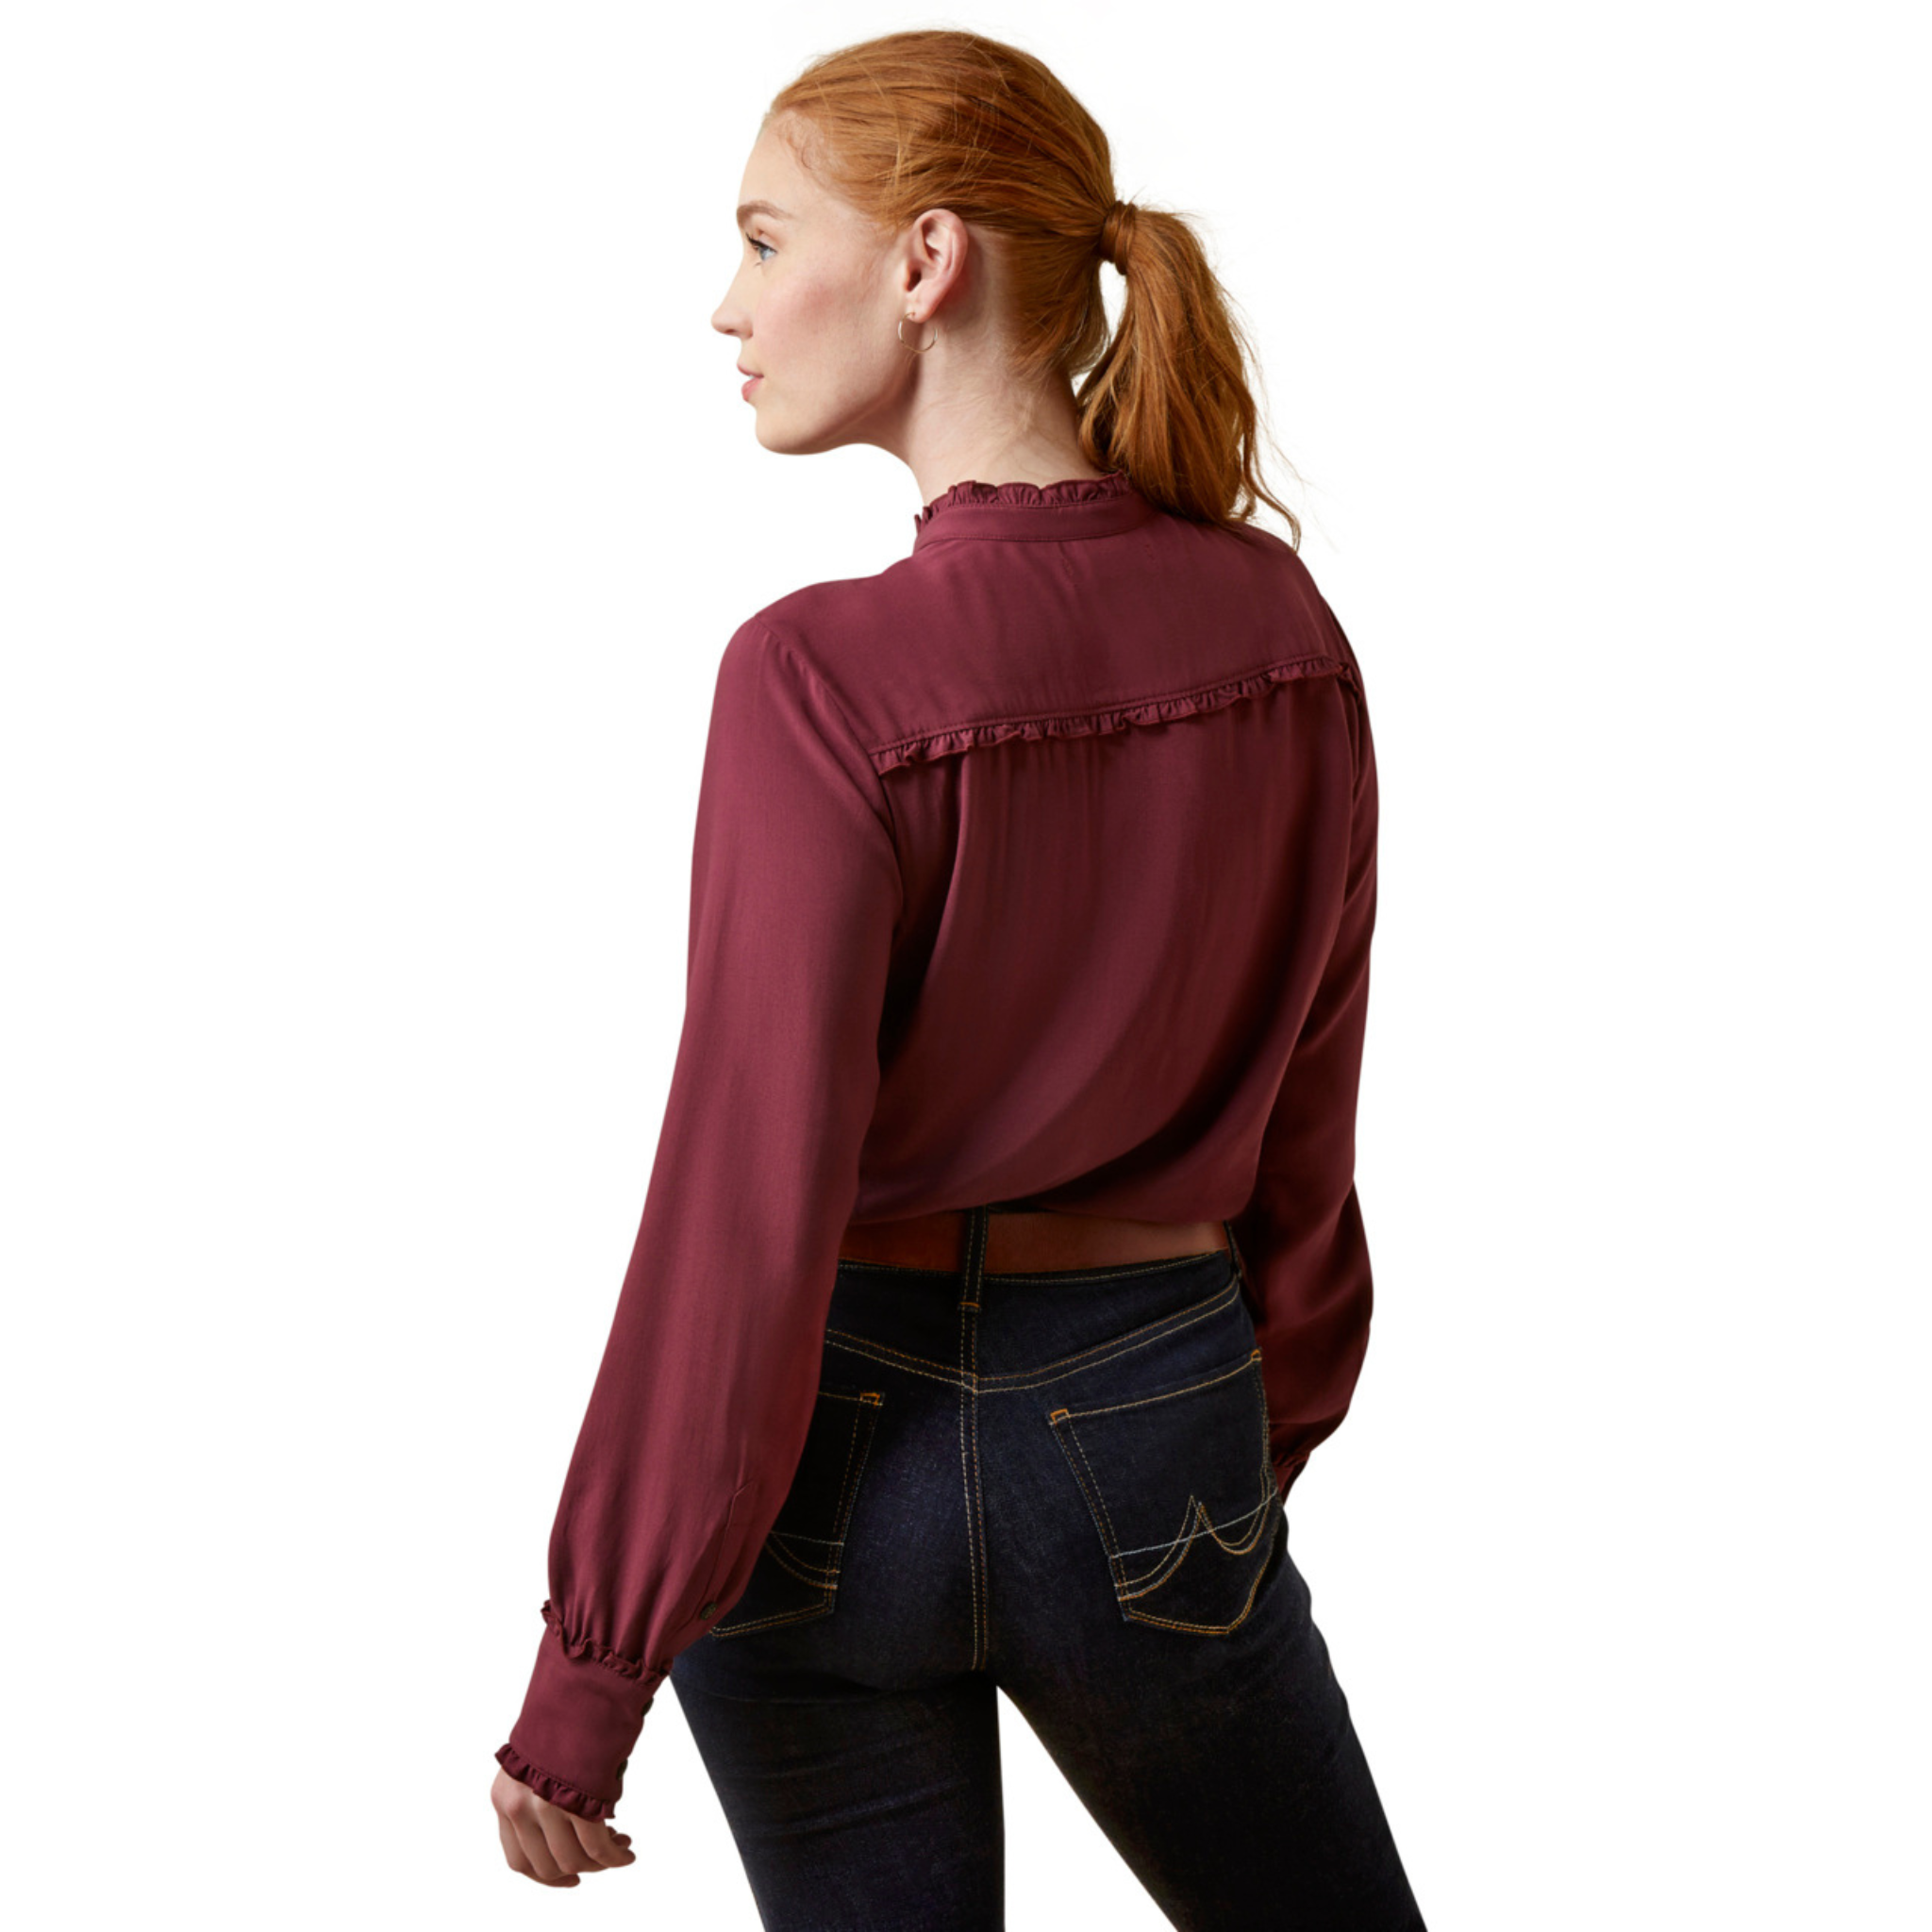 Clarion Blouse Tawny Port